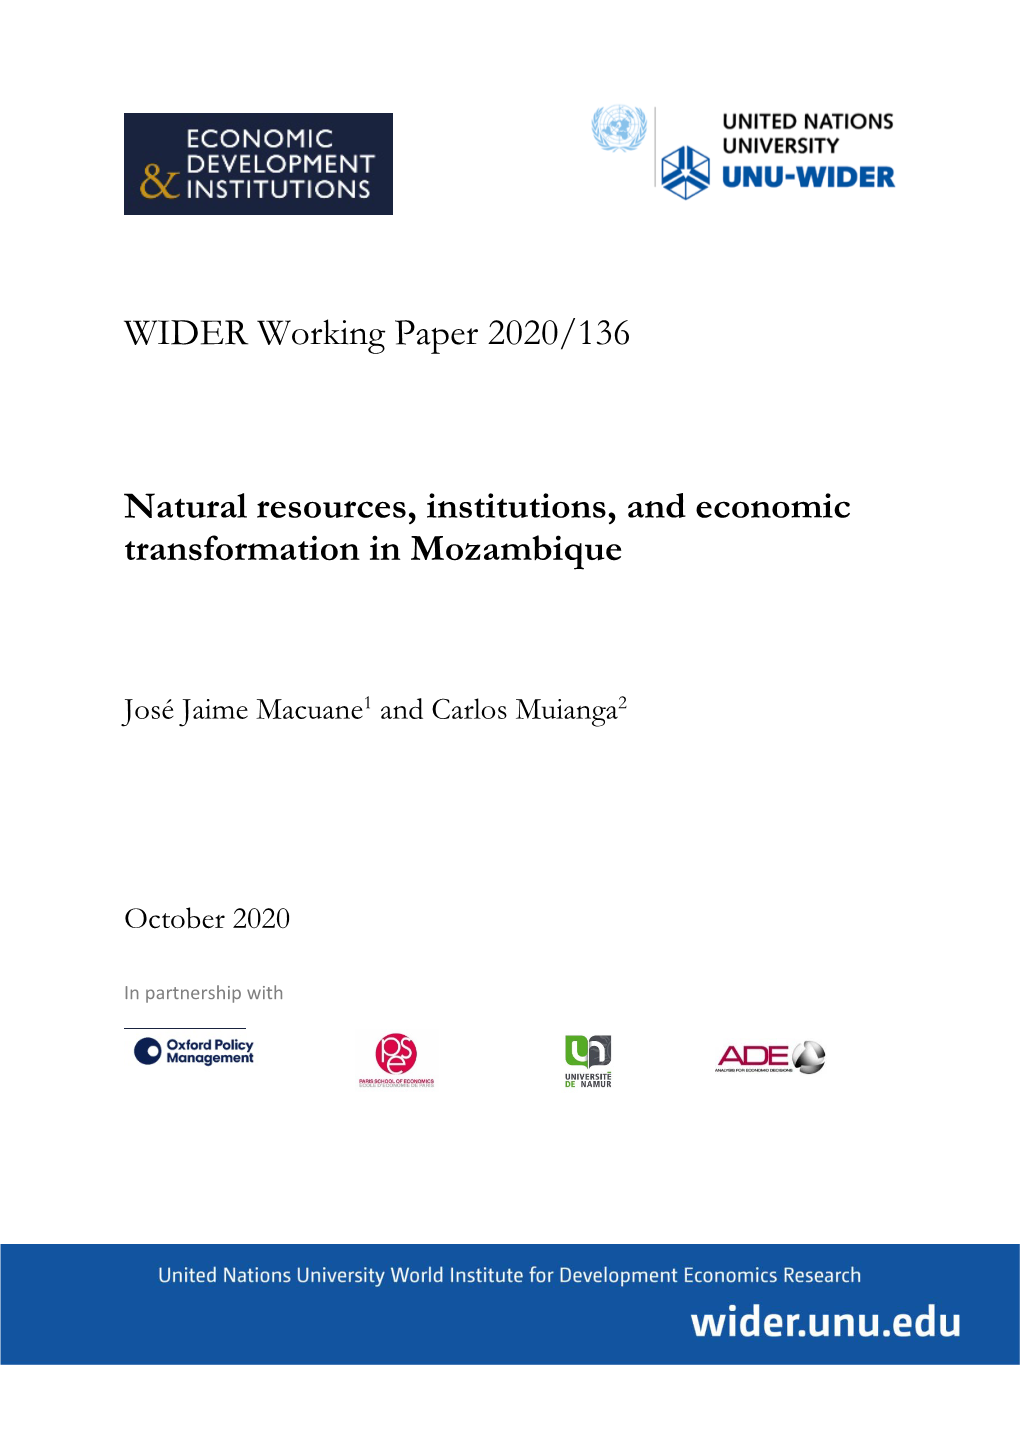 WIDER Working Paper 2020/136-Natural Resources, Institutions, and Economic Transformation in Mozambique